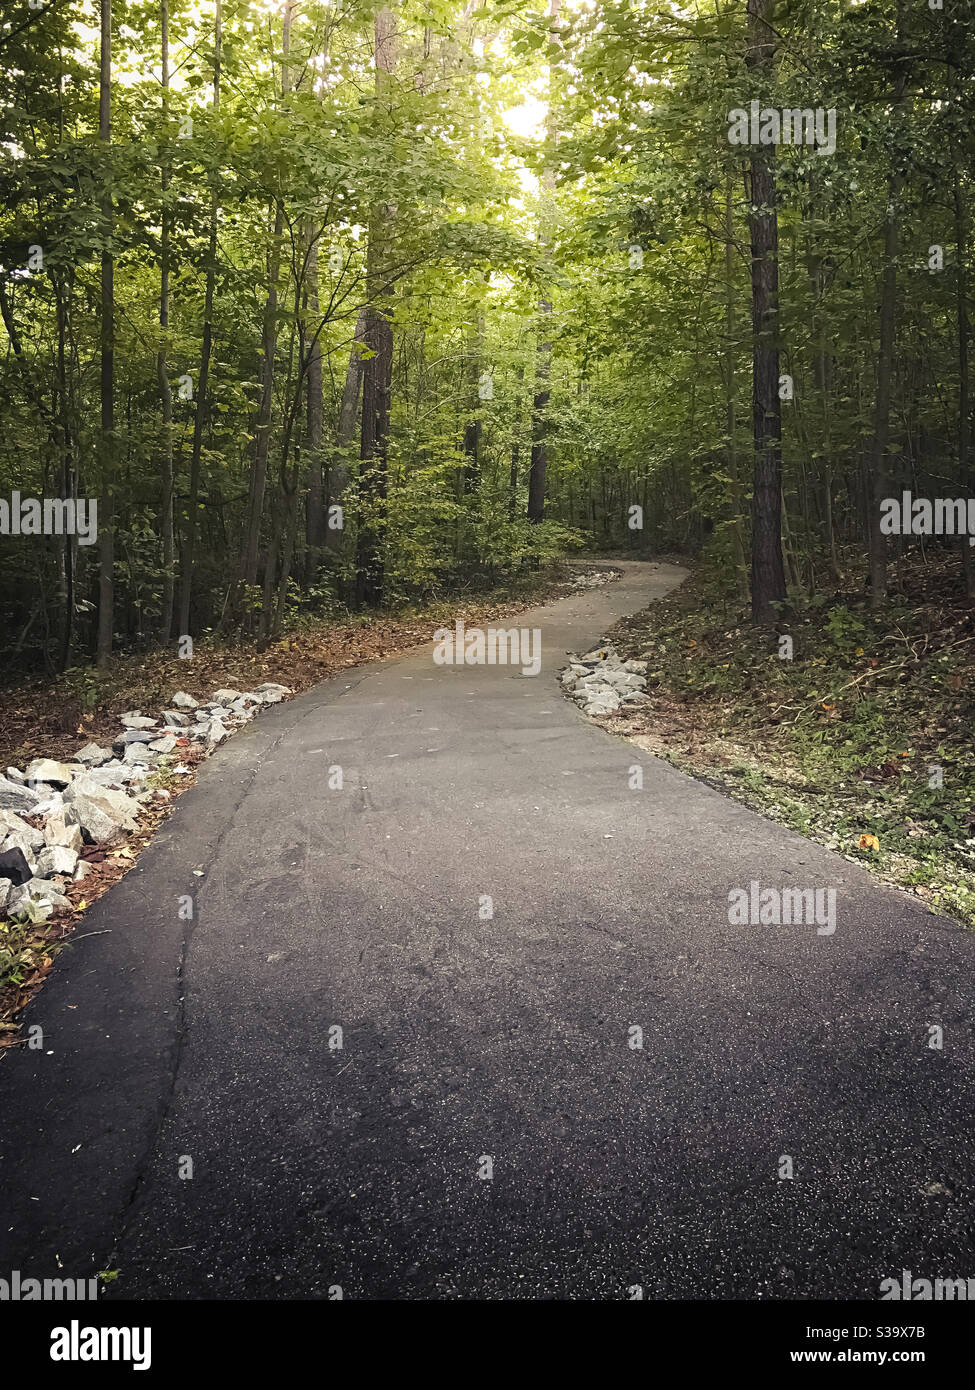 Curved paved path amidst trees Stock Photo